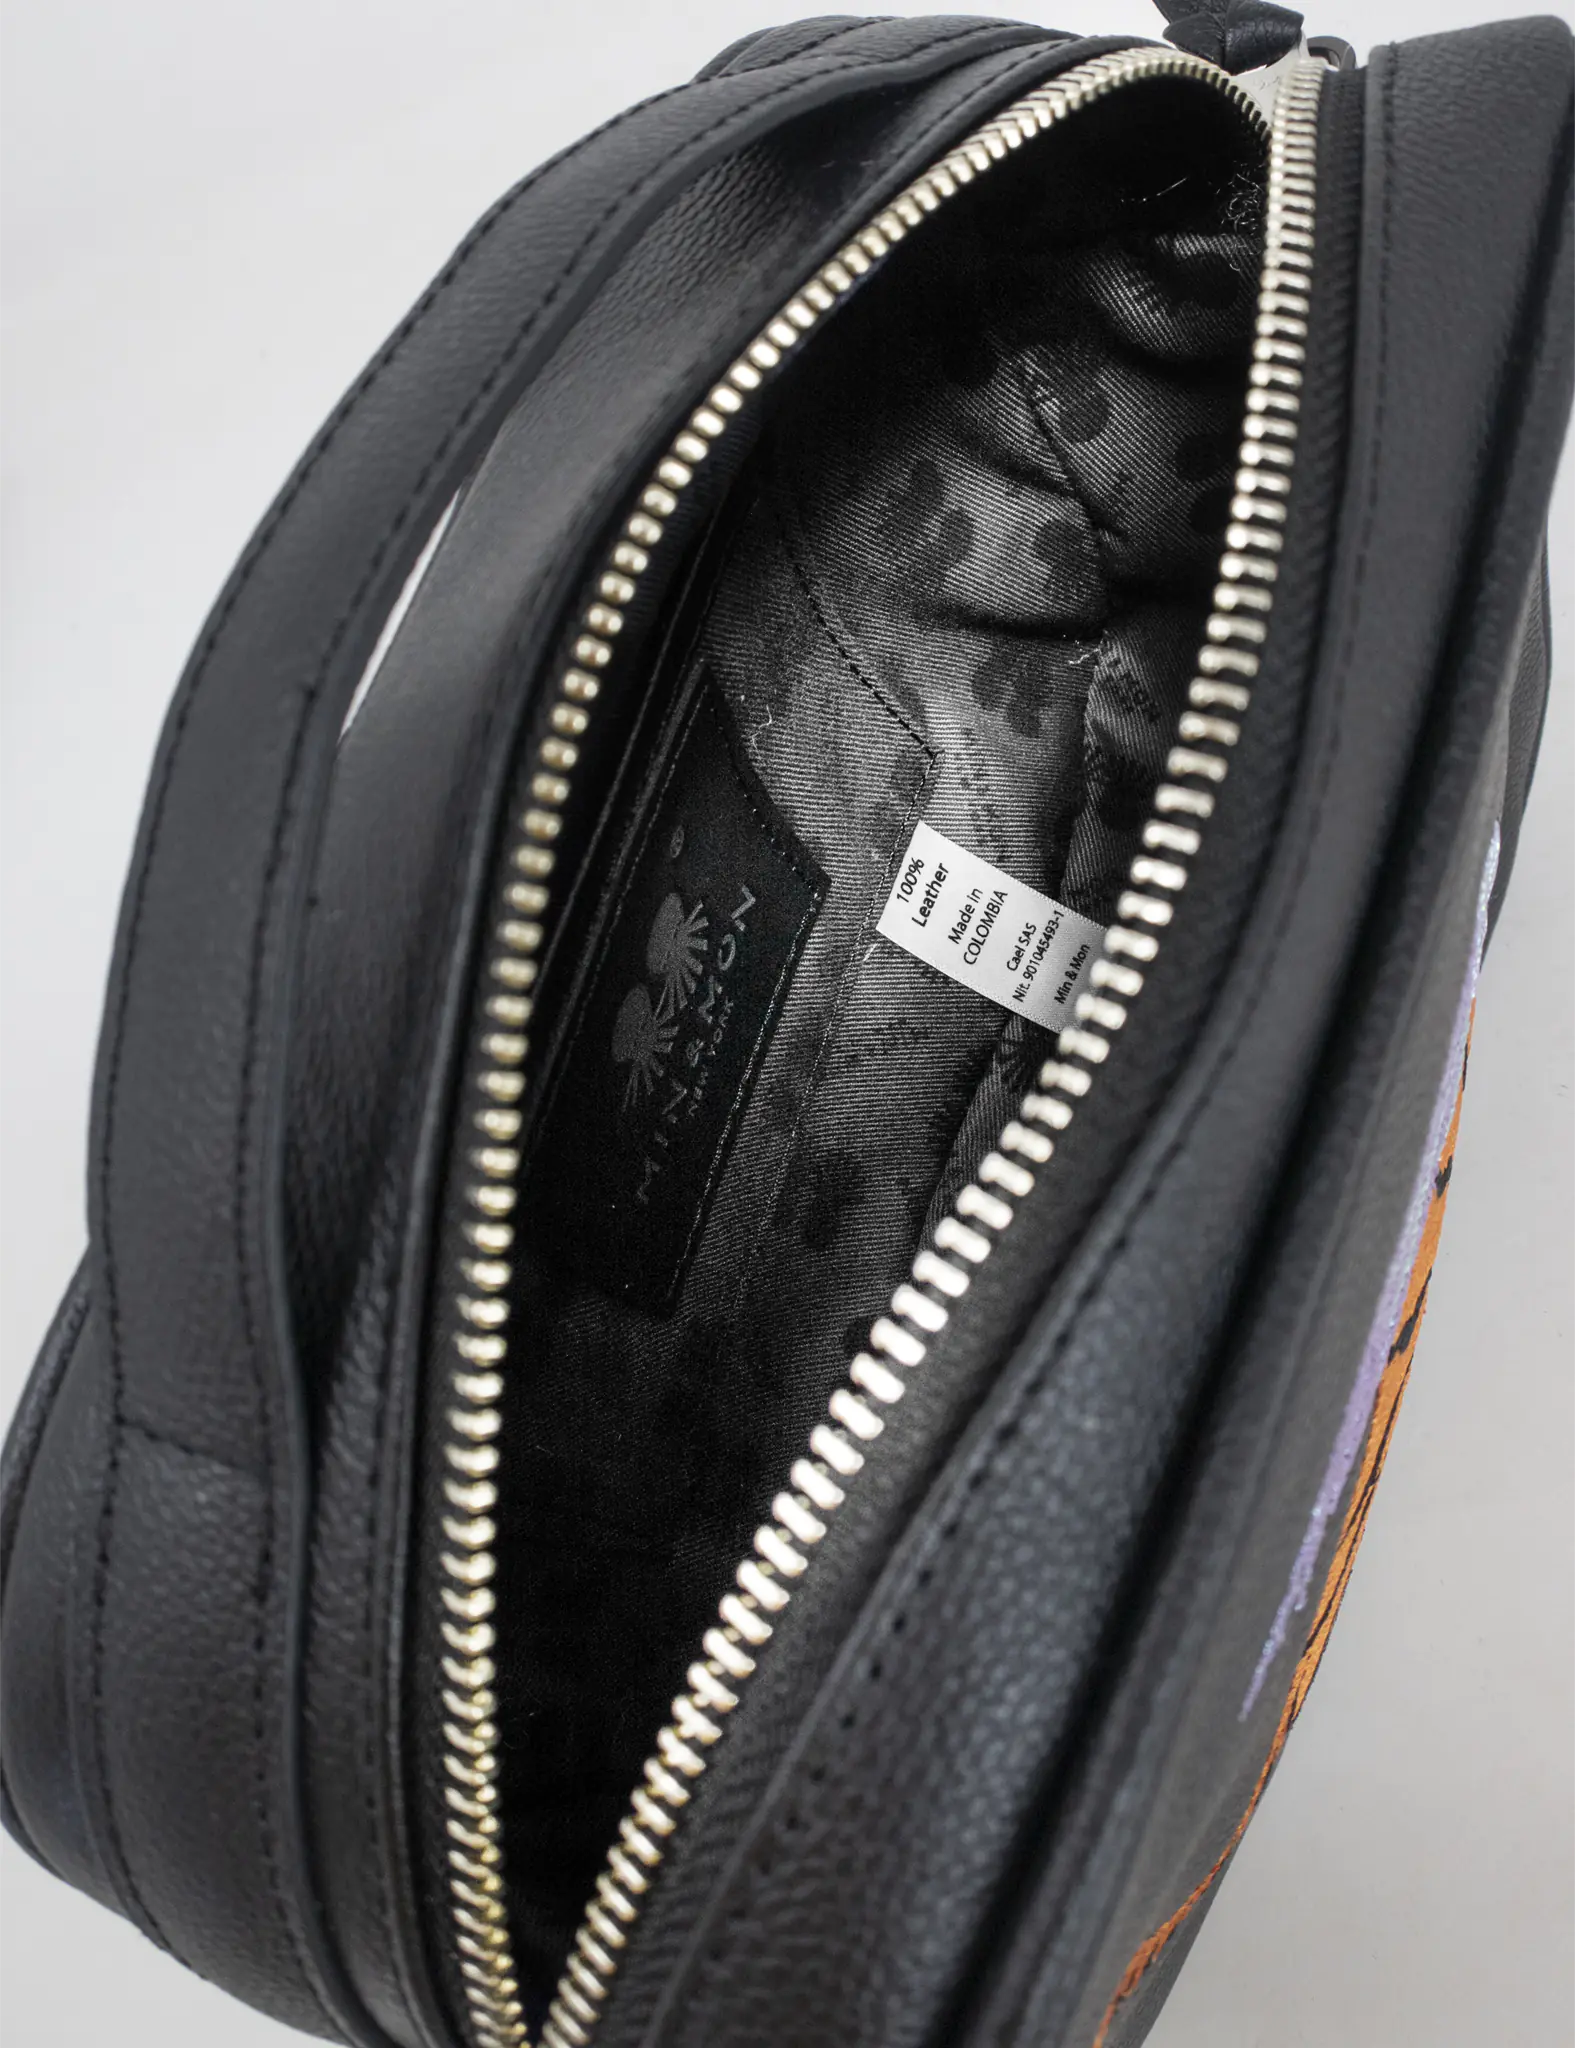 Black Leather Box Bag: Tiger Wings Embroidery | NYC Slow Fashion - Inside view